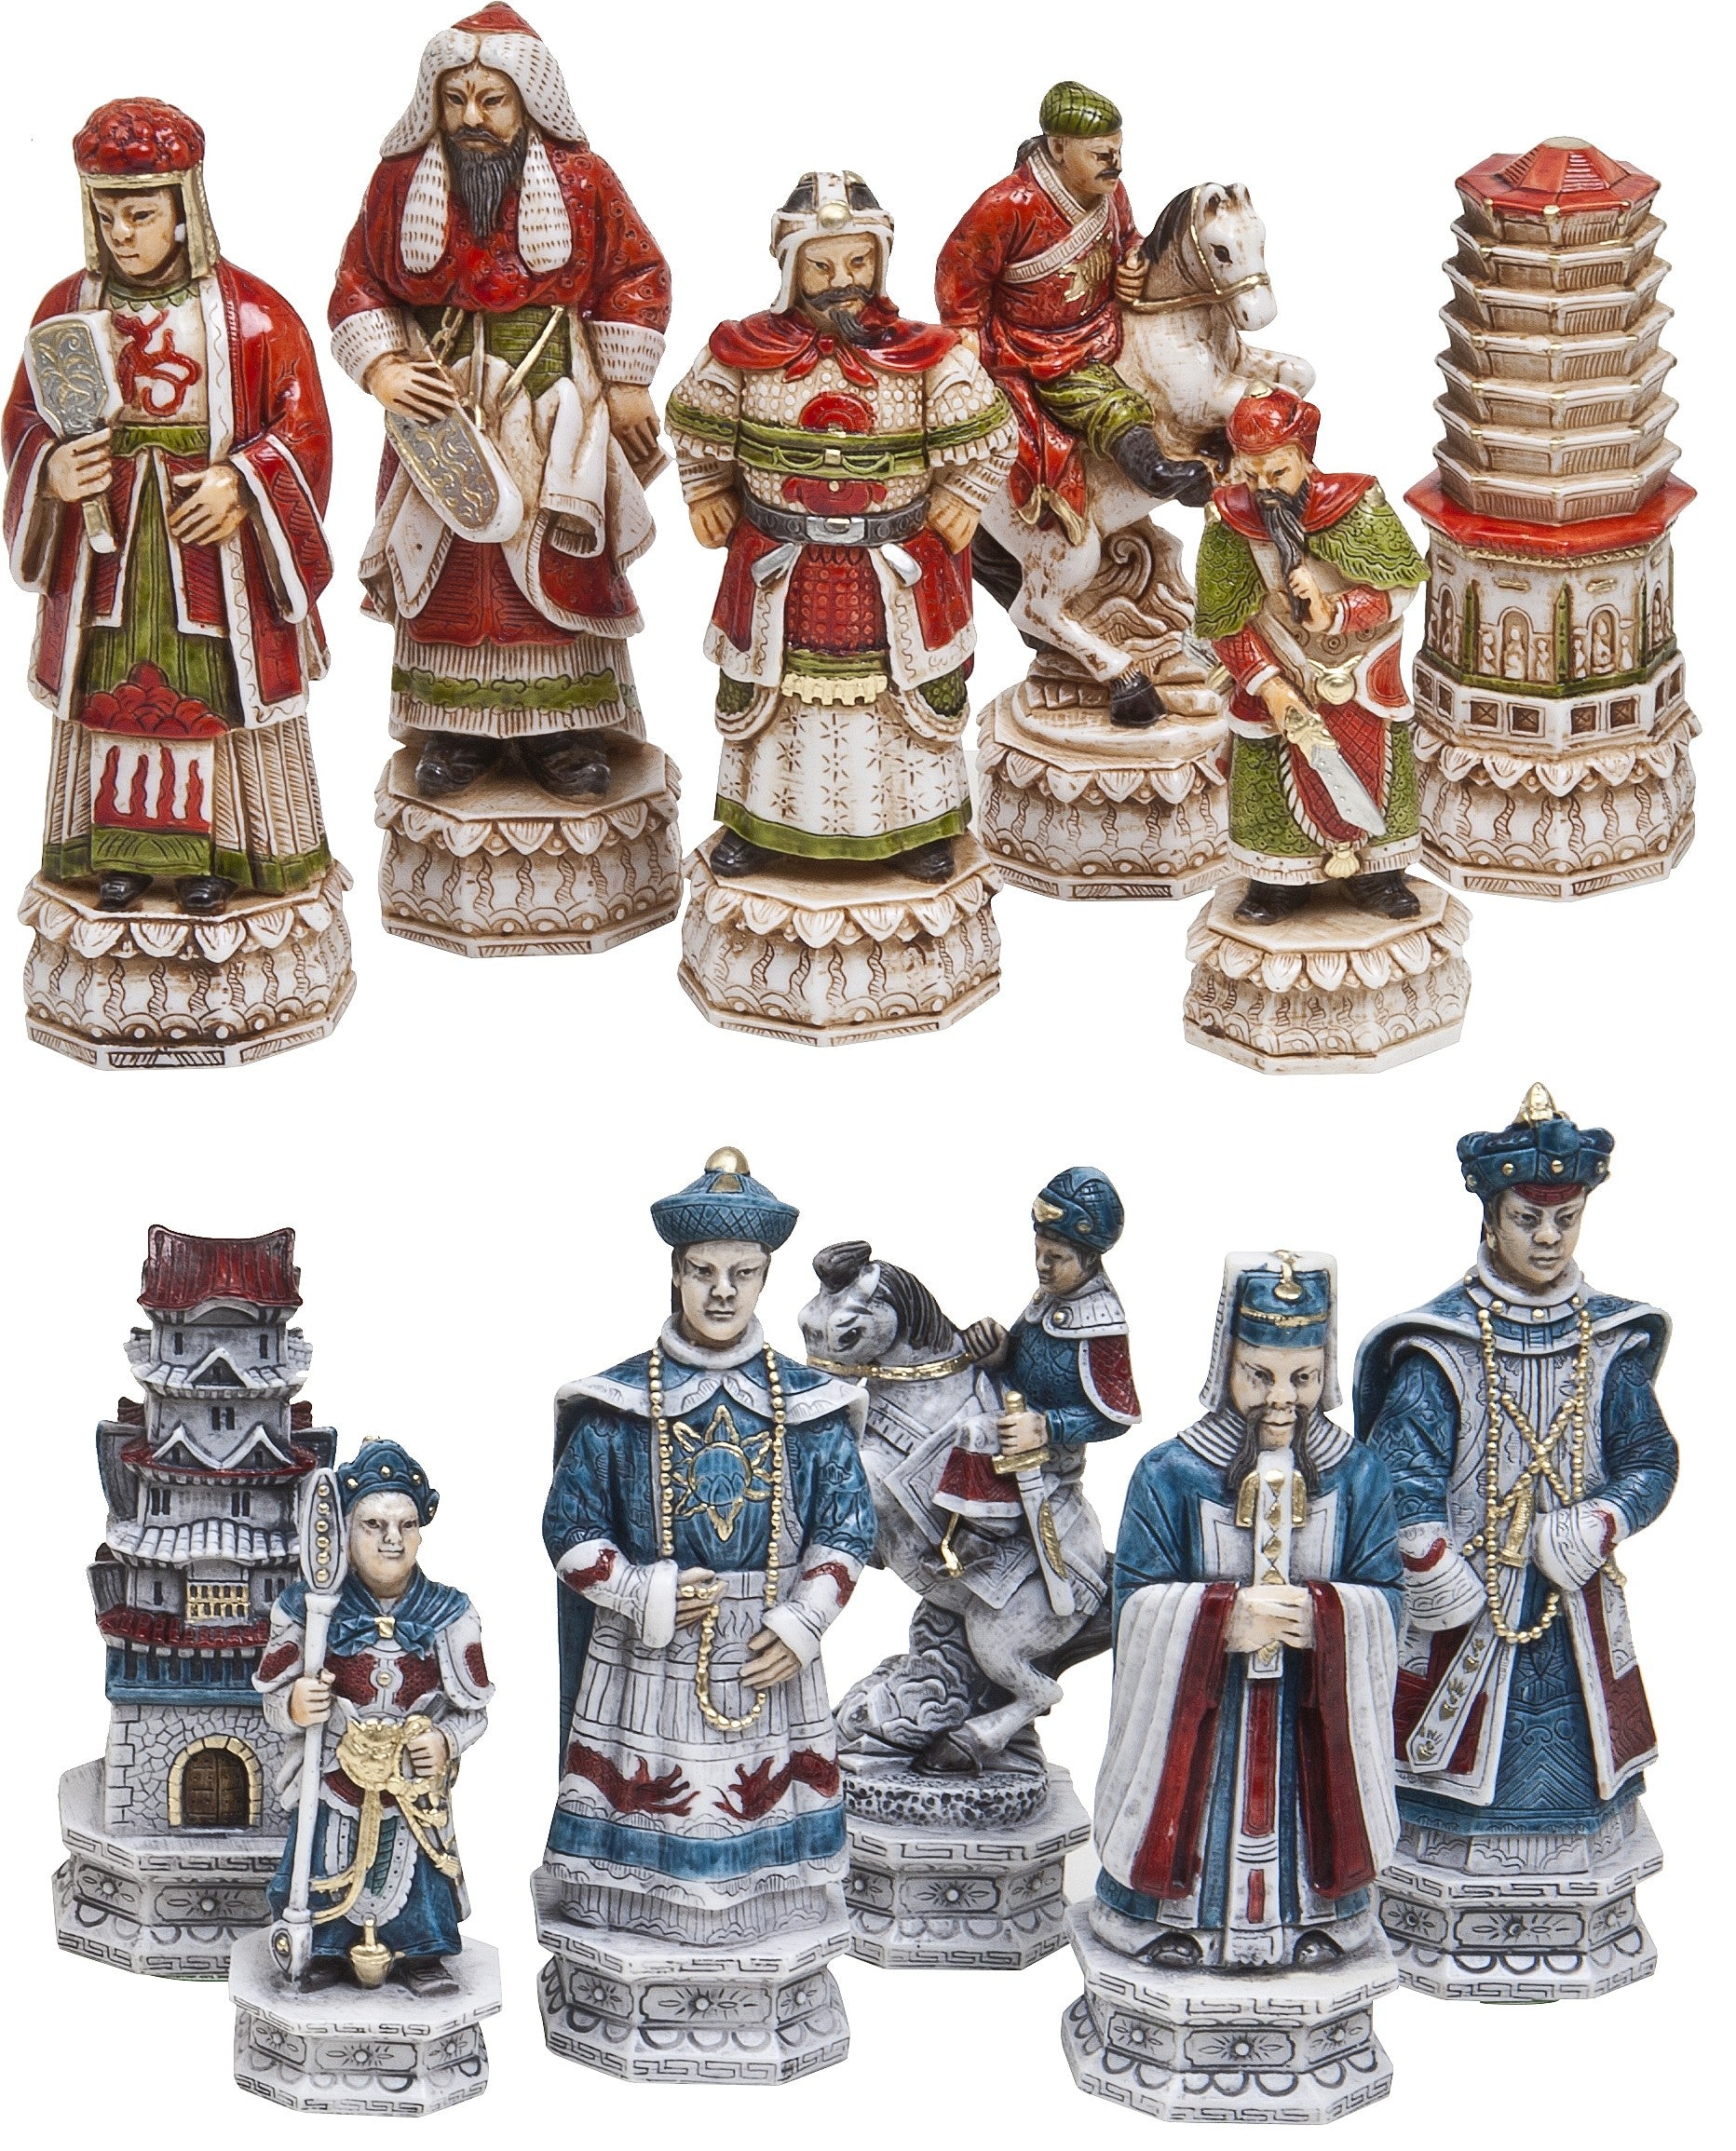 Aランク Pisa and Venice Alabaster Chessmen from Italy with Greenwich Street  Chess B